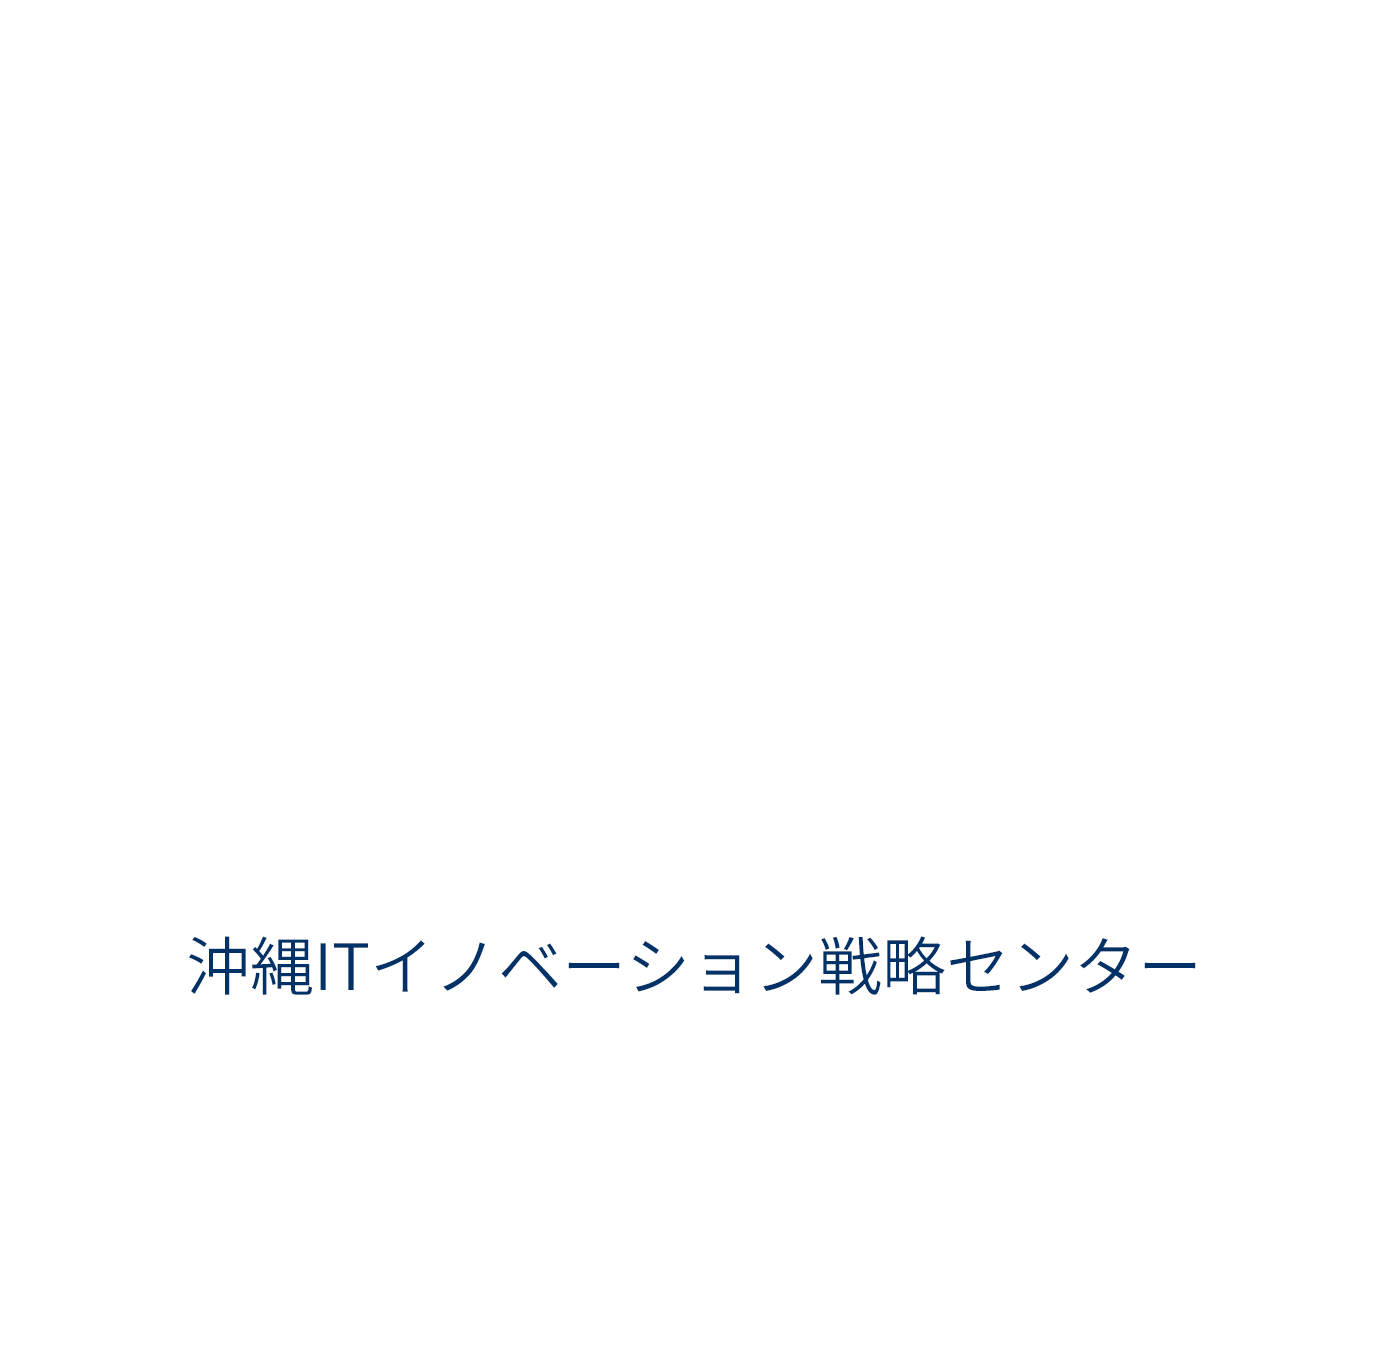 IT Innovation and Strategy Center Okinawa「沖縄ITイノベーション戦略センター」 | Co-create destructive services and industries with Okinawa through utilizing IT innovation.